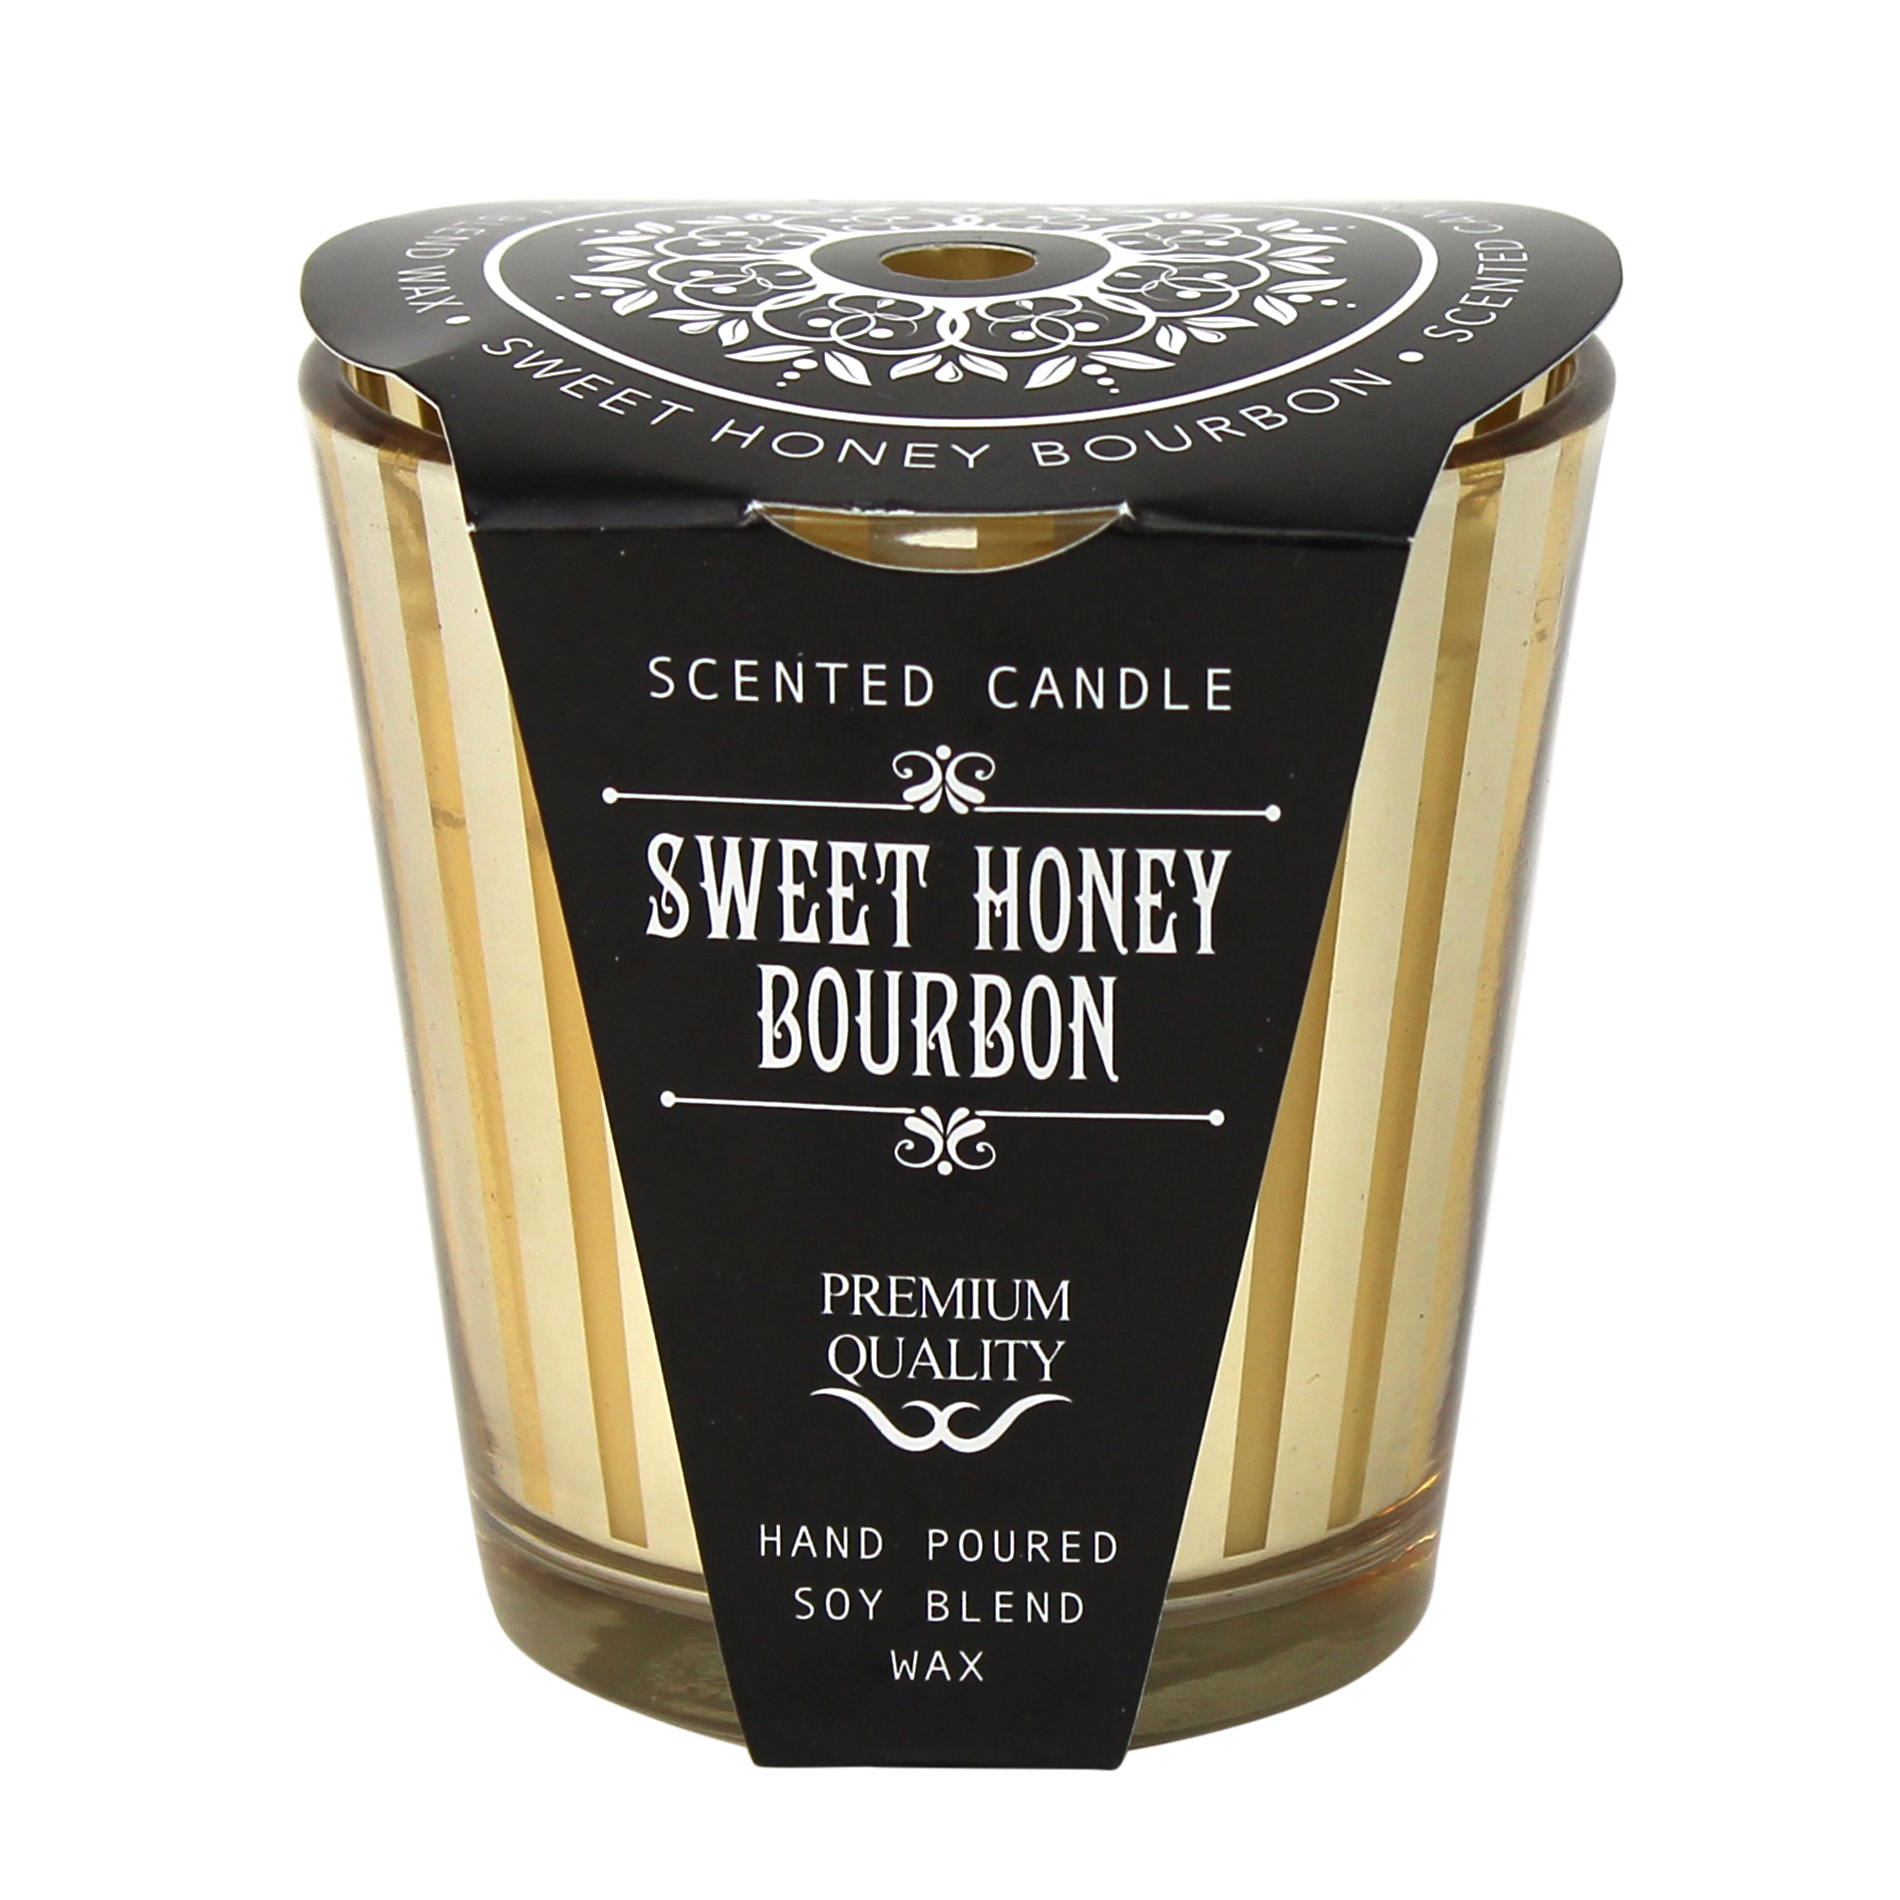 5 Oz. Scented Cocktail Candle - Honey Bourbon